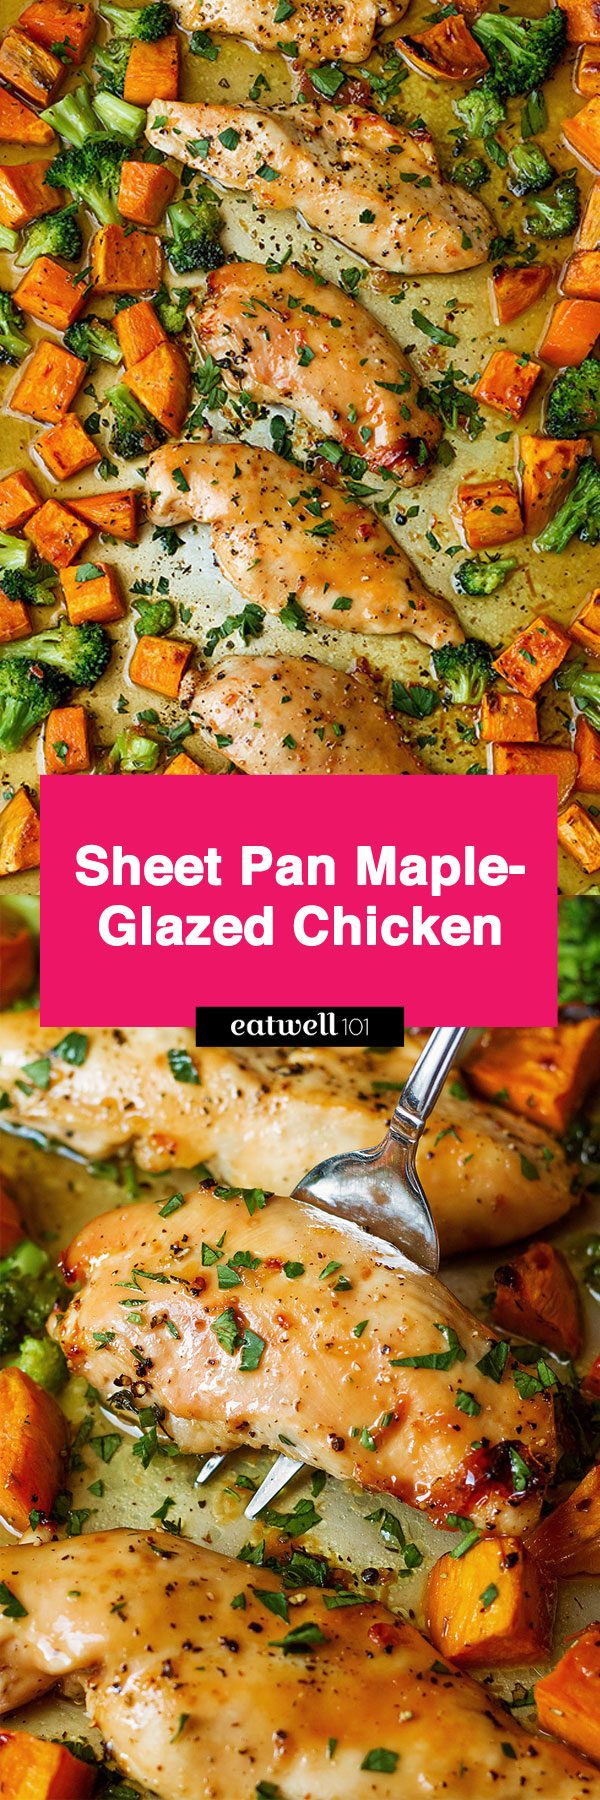 Sheet Pan Maple-Glazed Chicken and Sweet Potatoes – Sticky chicken breasts coated in a finger-licking maple butter glaze.